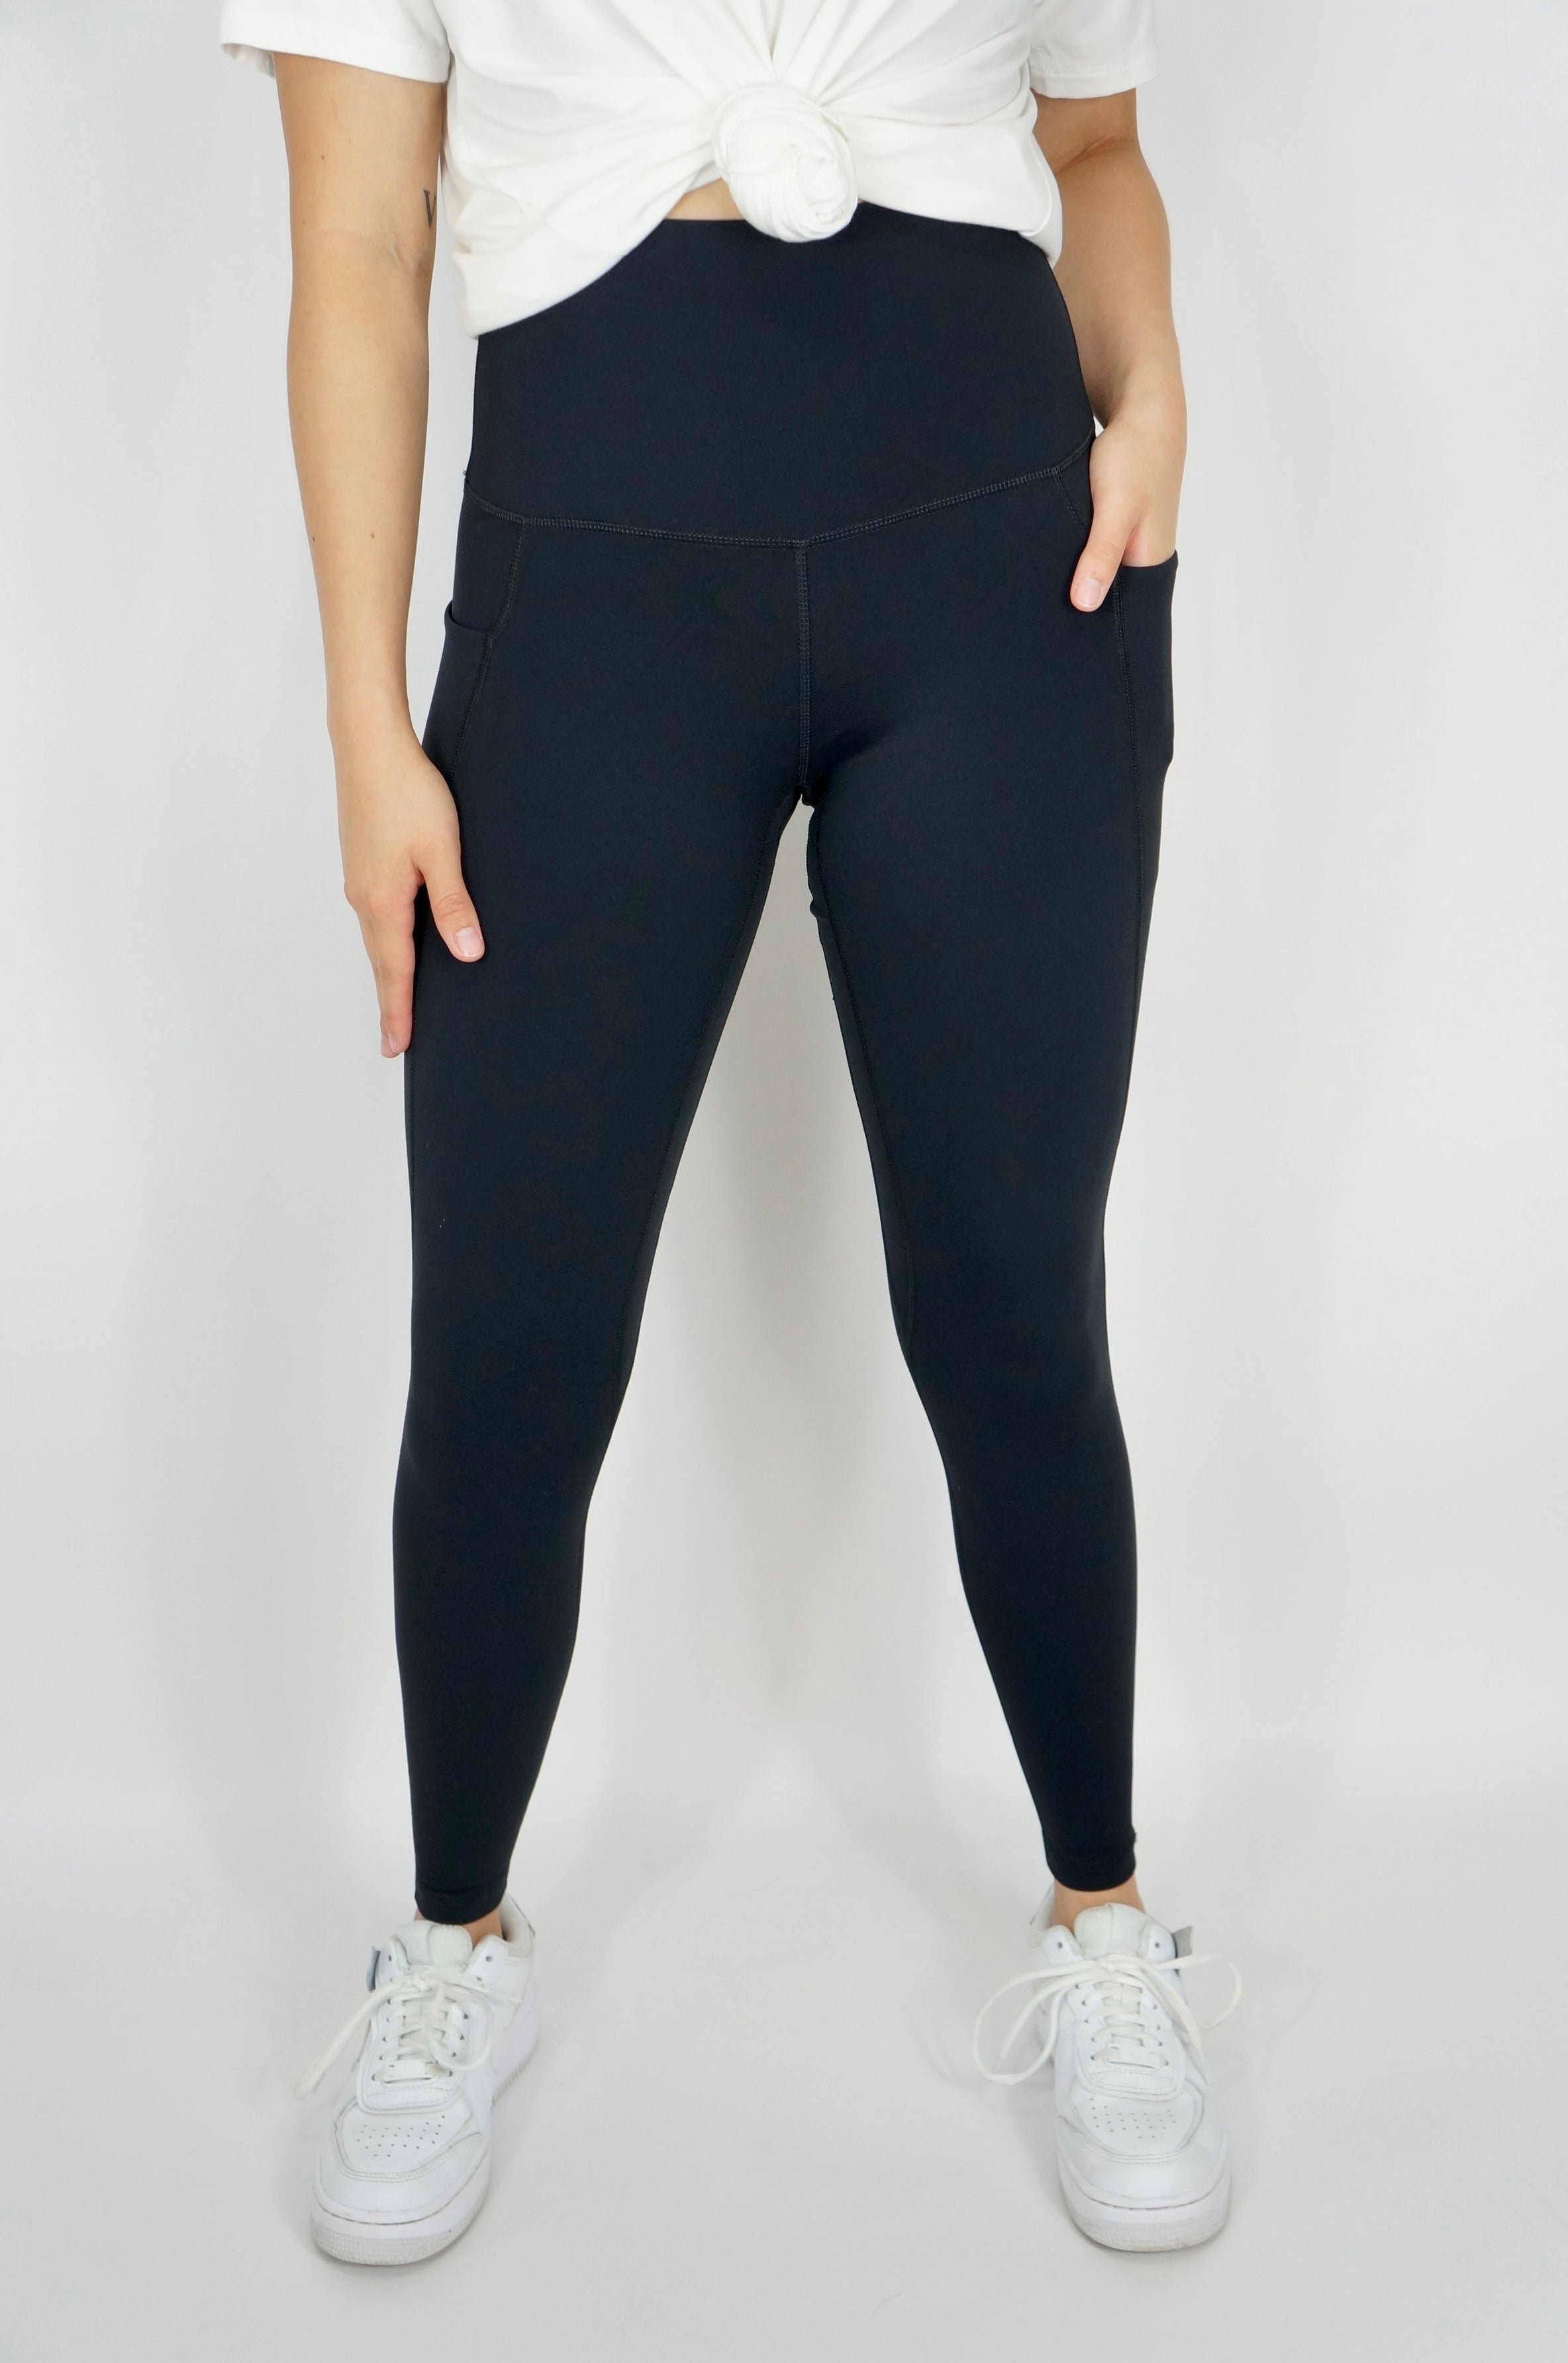 All Day Comfort Legging, $10 DEAL OF THE DAY! | JENNY BOSTON BOUTIQUE